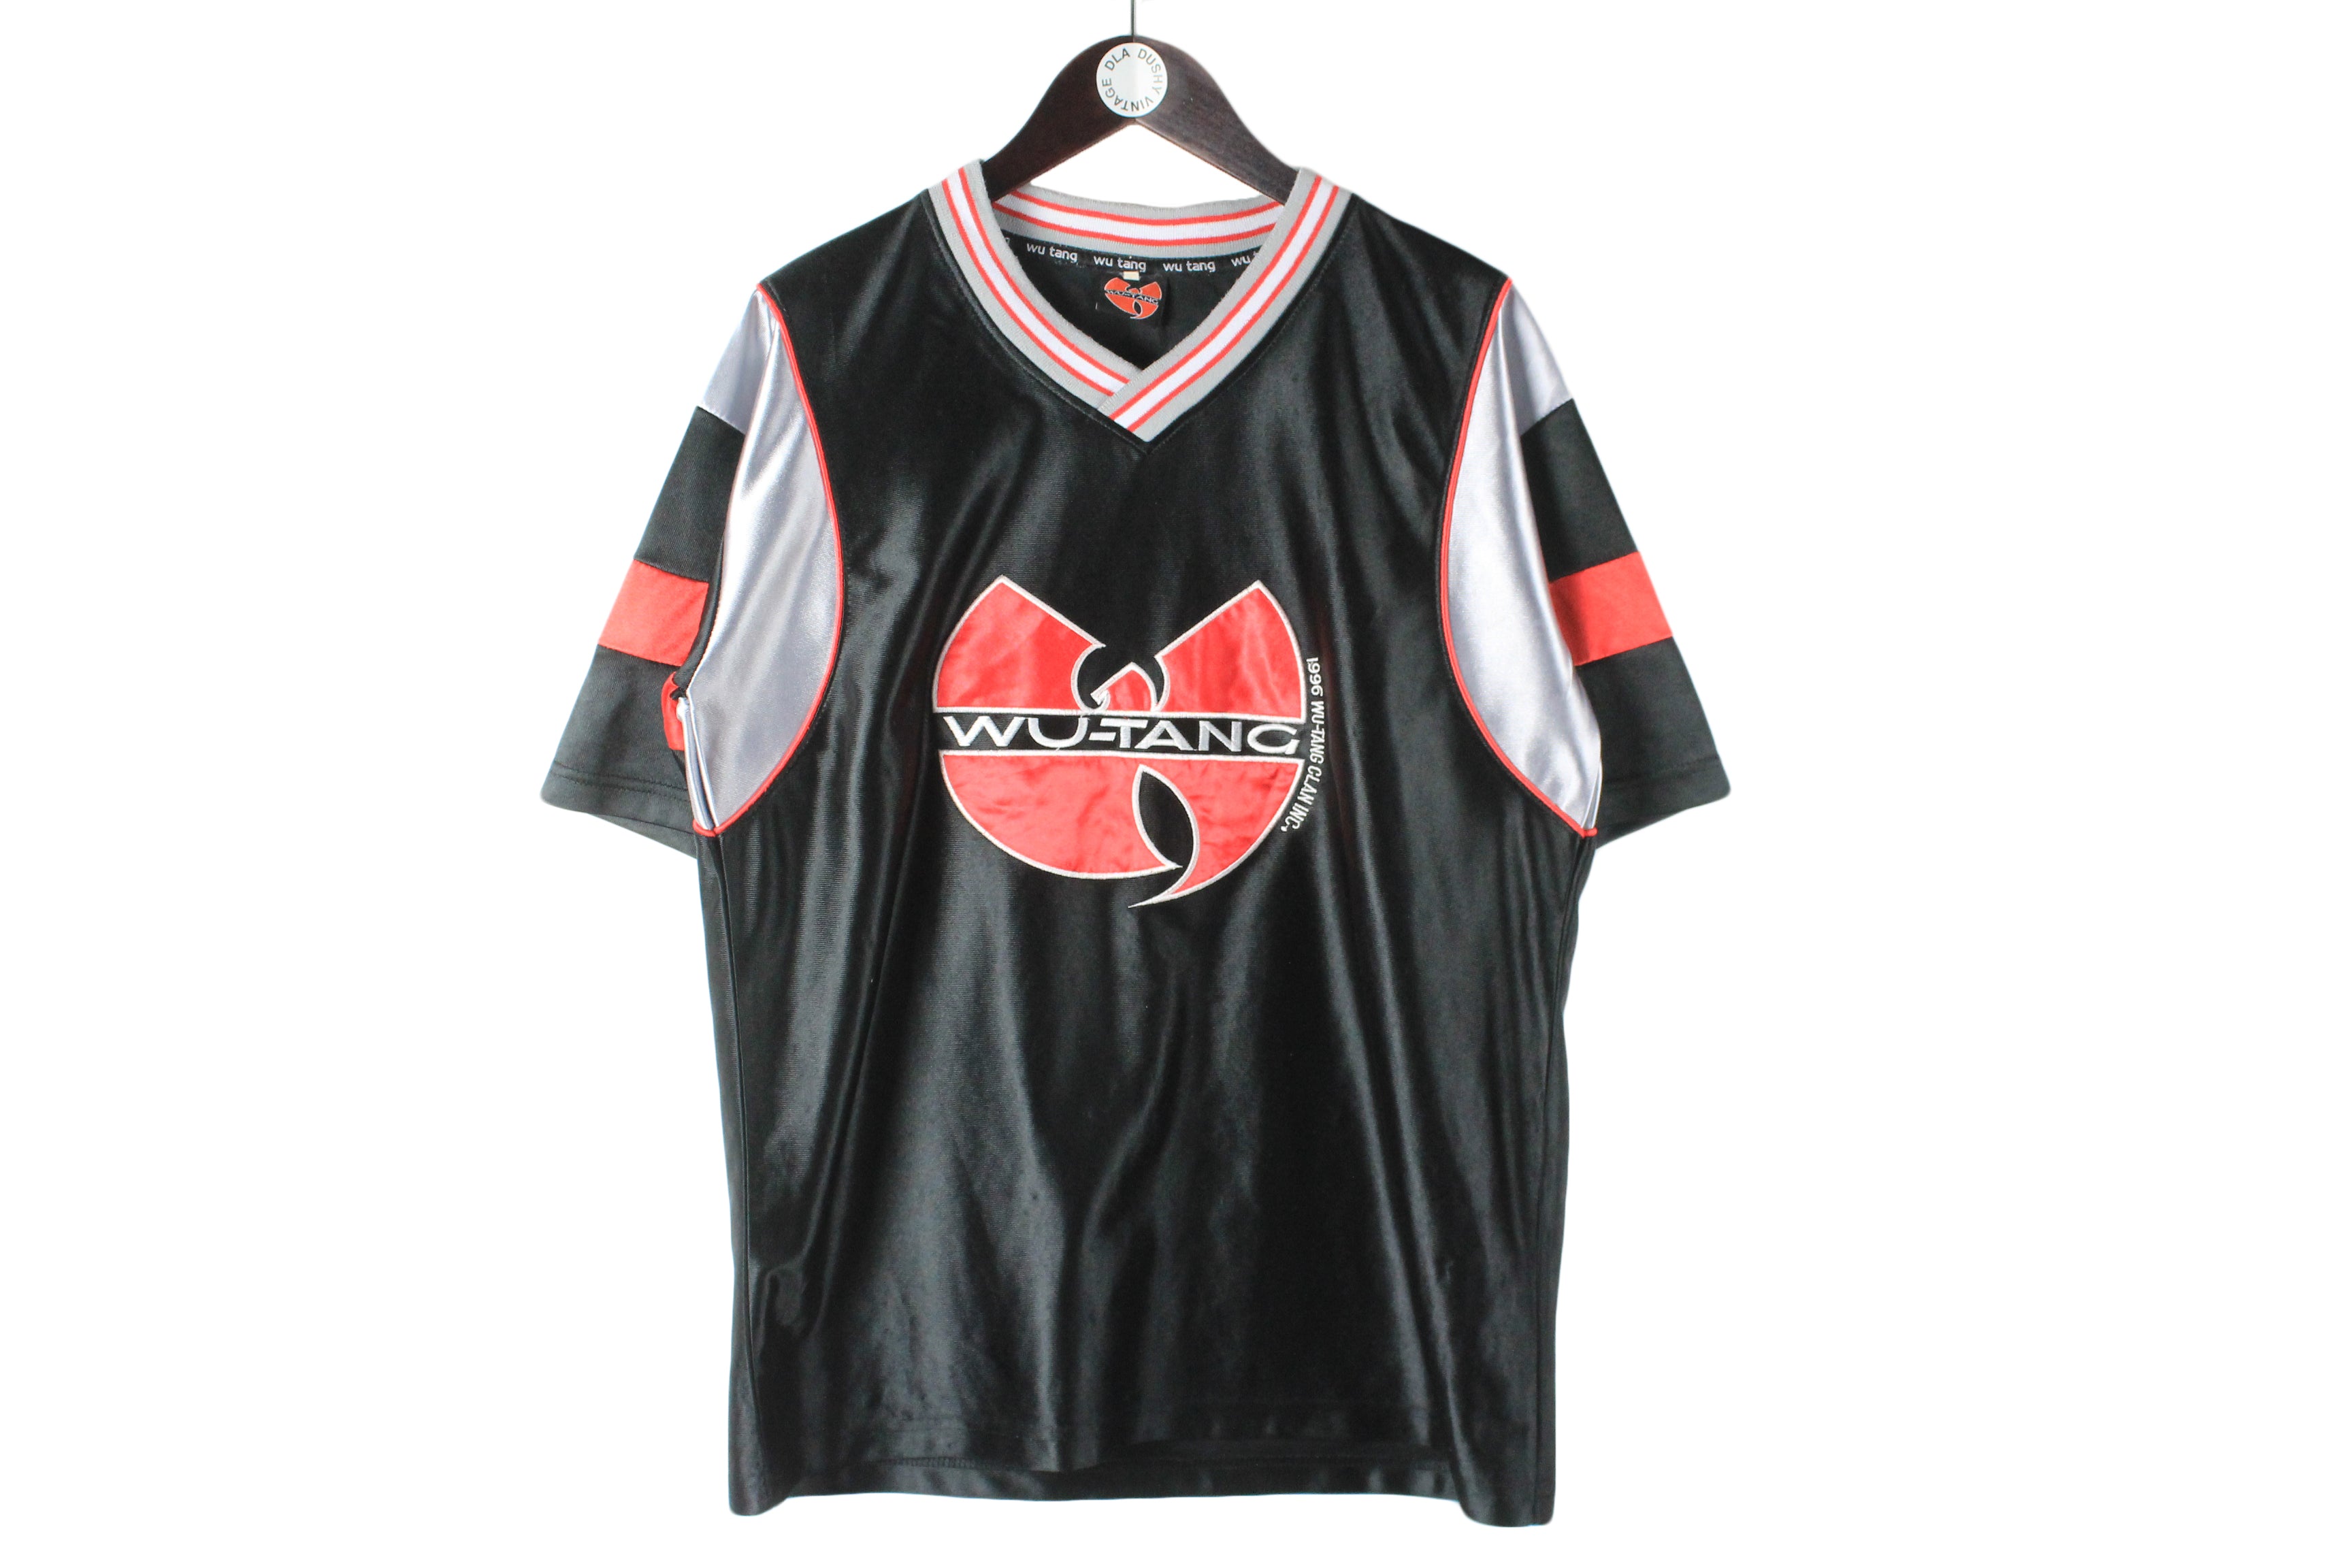 WU TANG FOREVER JERSEY 1996VINTAGE JERSEY RED L